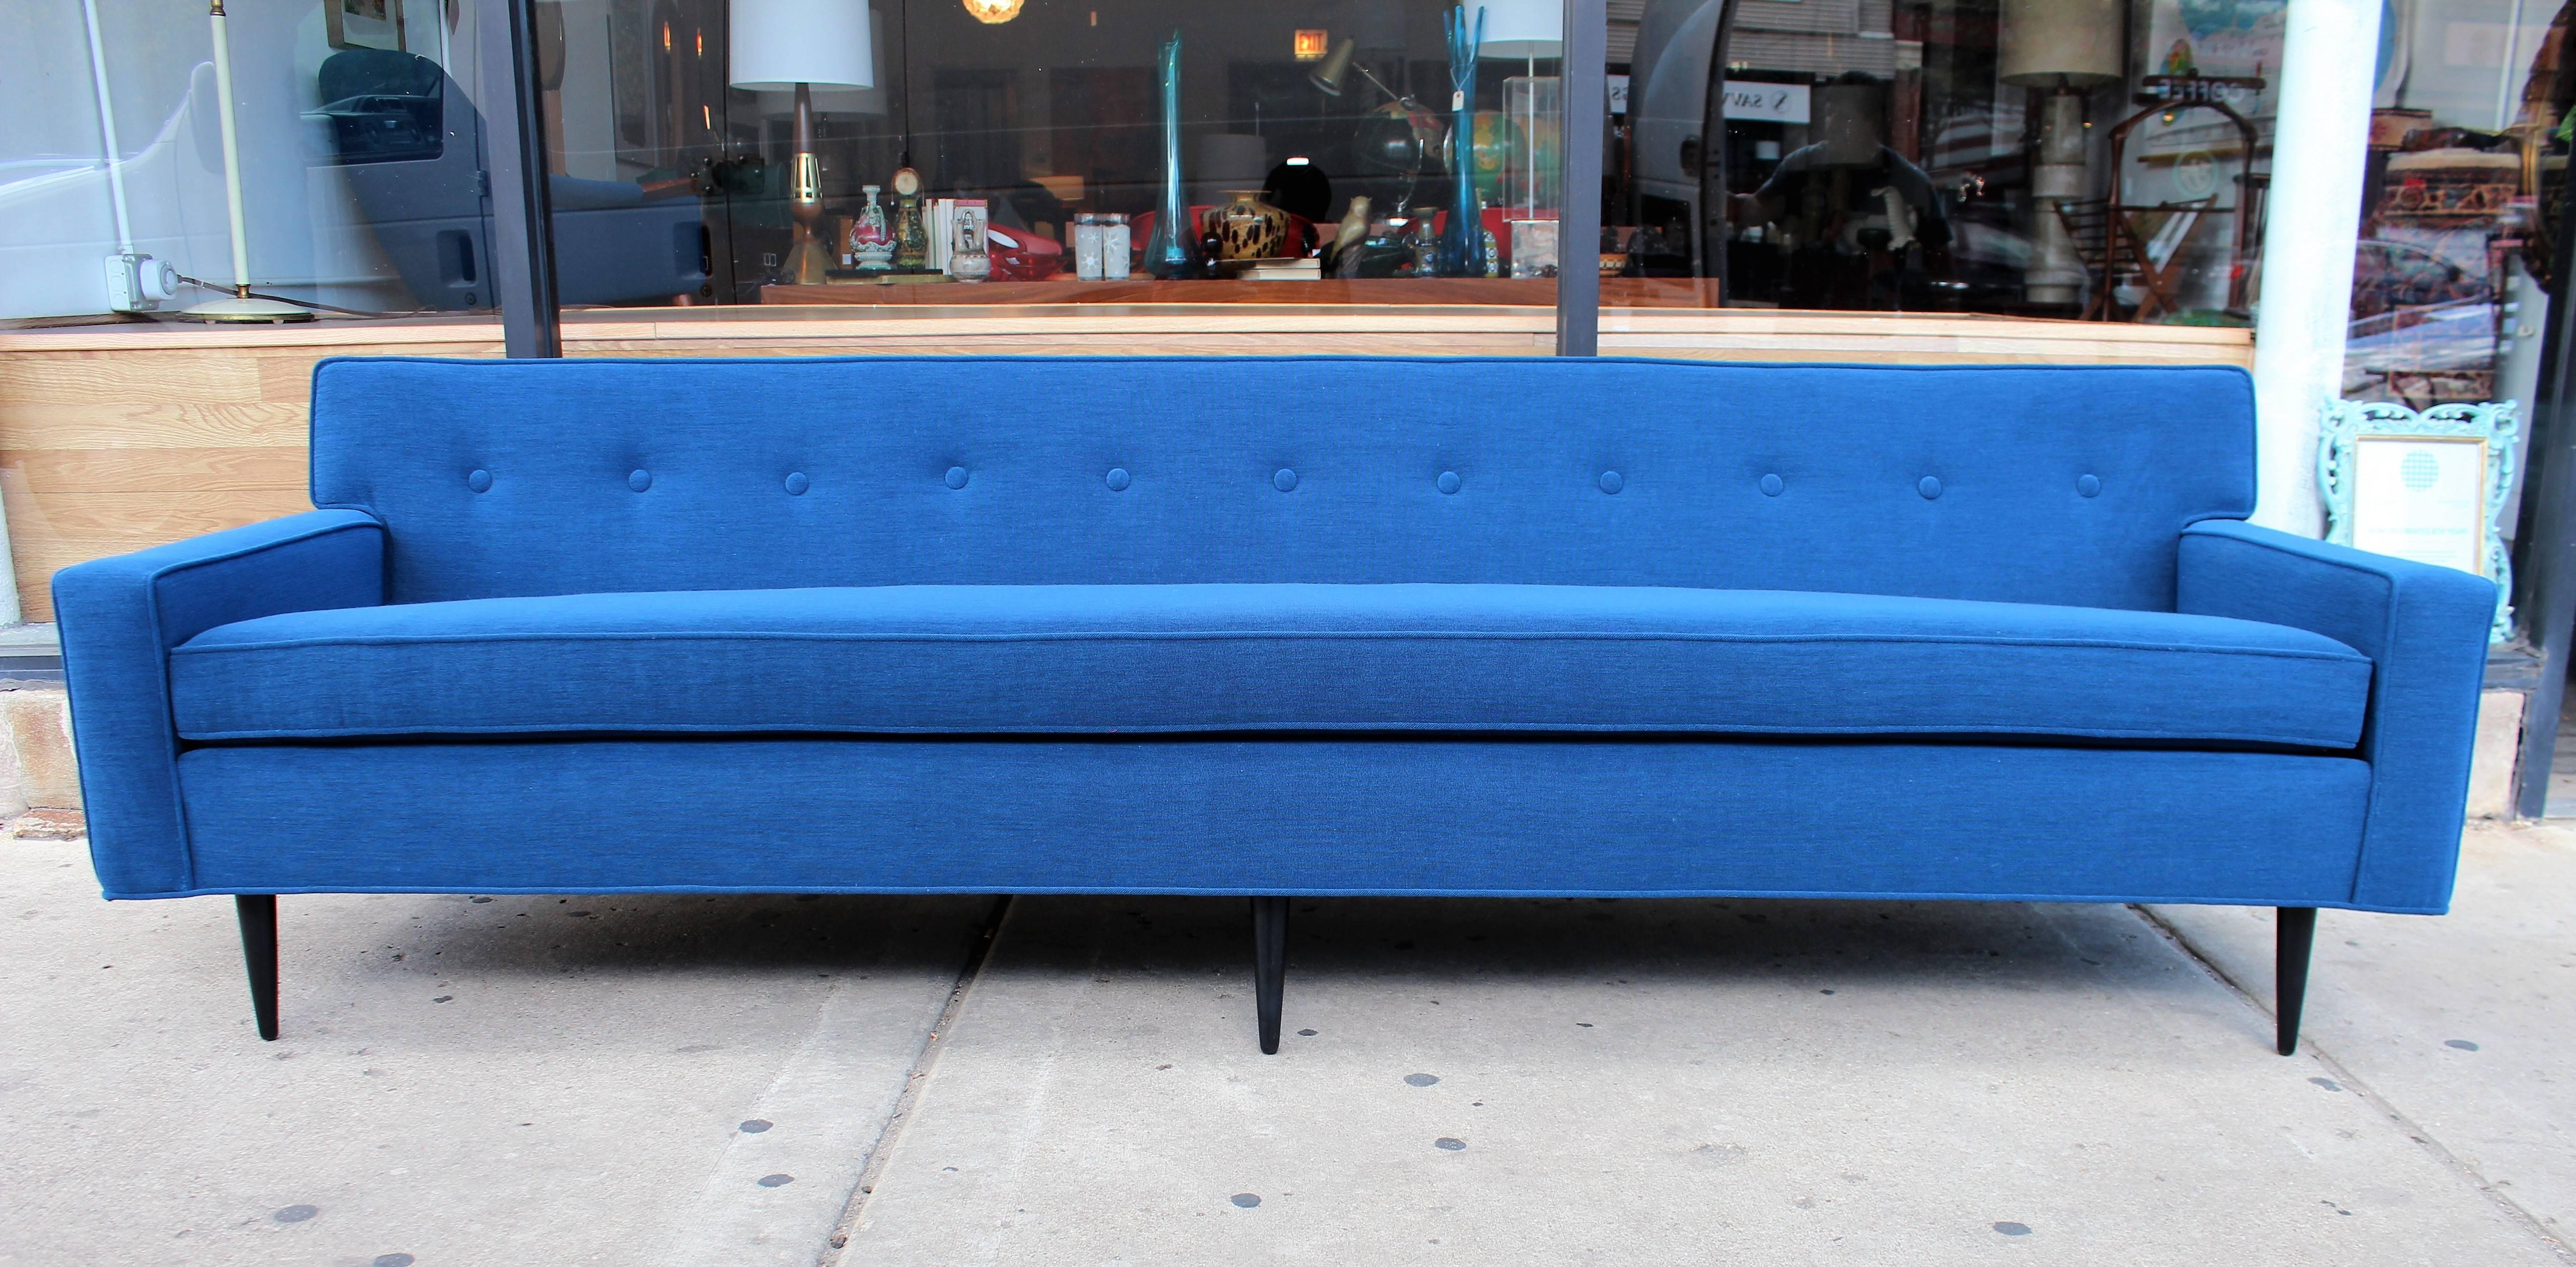 Blue is the new neutral! Exquisitely upholstered long, sexy, button tufted back, Mid-Century Modern 1960s sofa in a French *Epingle. Beautiful and luxurious. *Said to be more durable than Mohair, épinglé is constructed on a loom. The art of épinglé